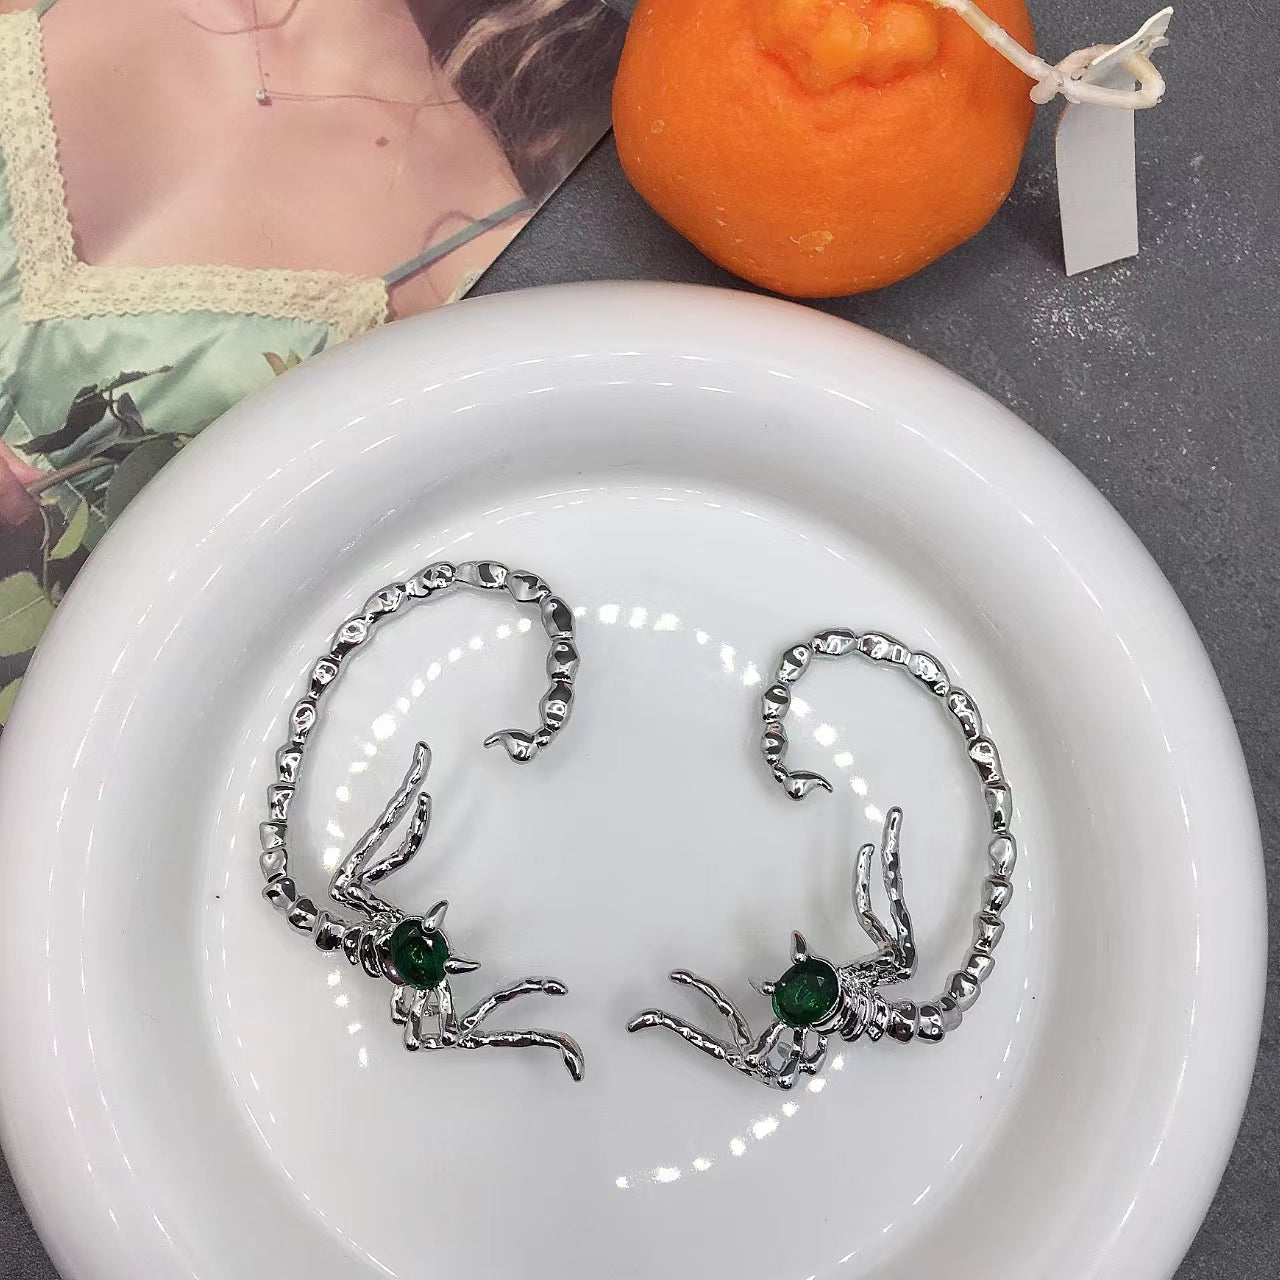 Sweet and cool emerald scorpion earrings female dark fashion cool opening ring scorpion pendant necklace